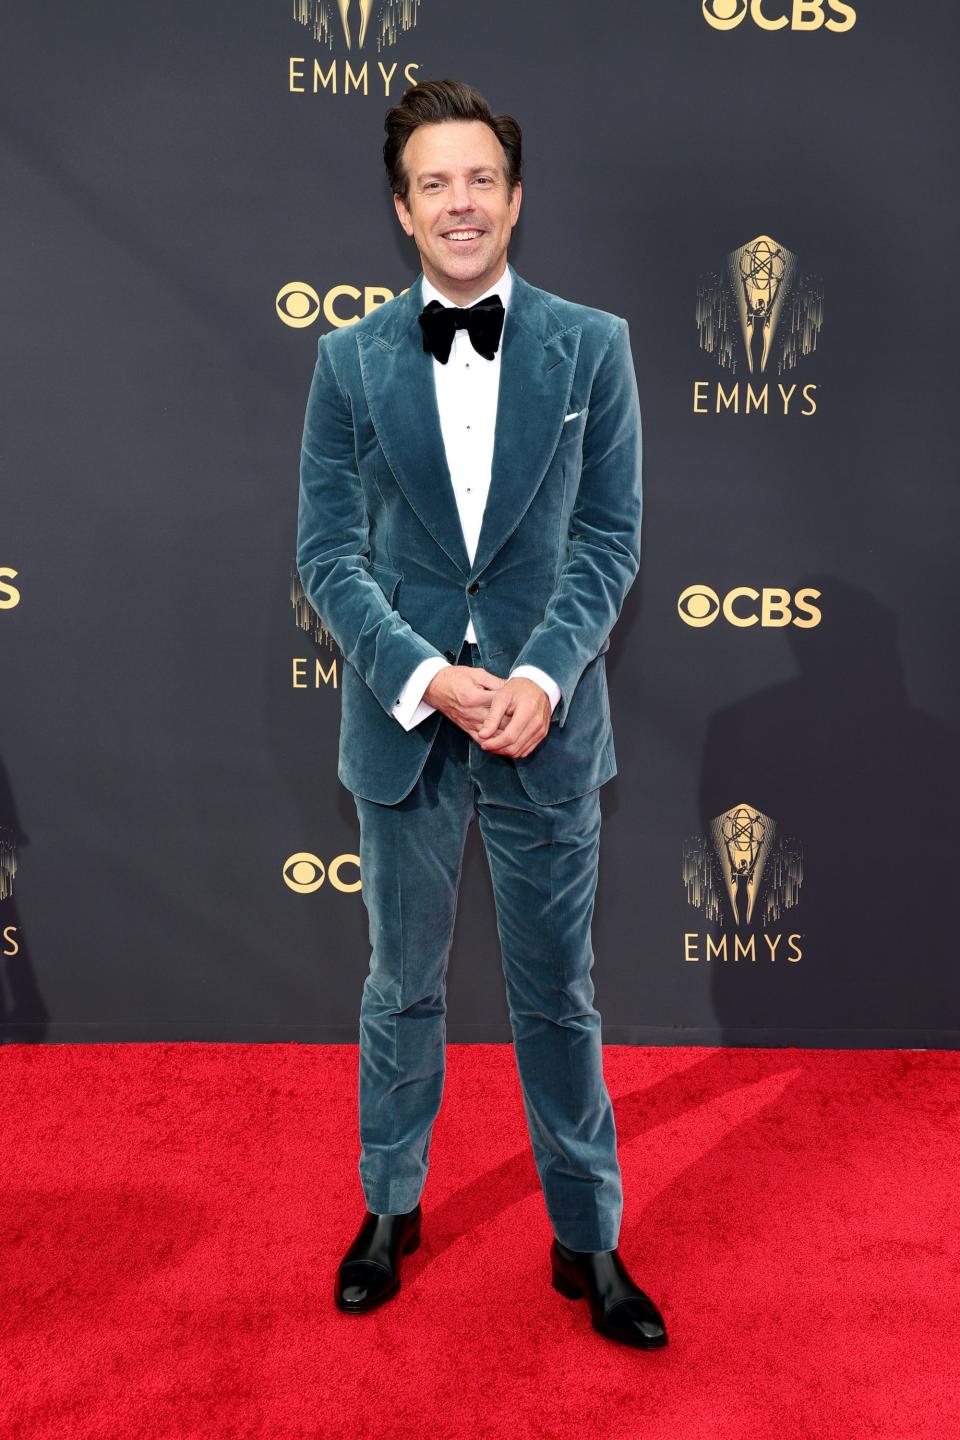 Jason Sudeikis wears a blue tuxedo at the 2021 Emmys.